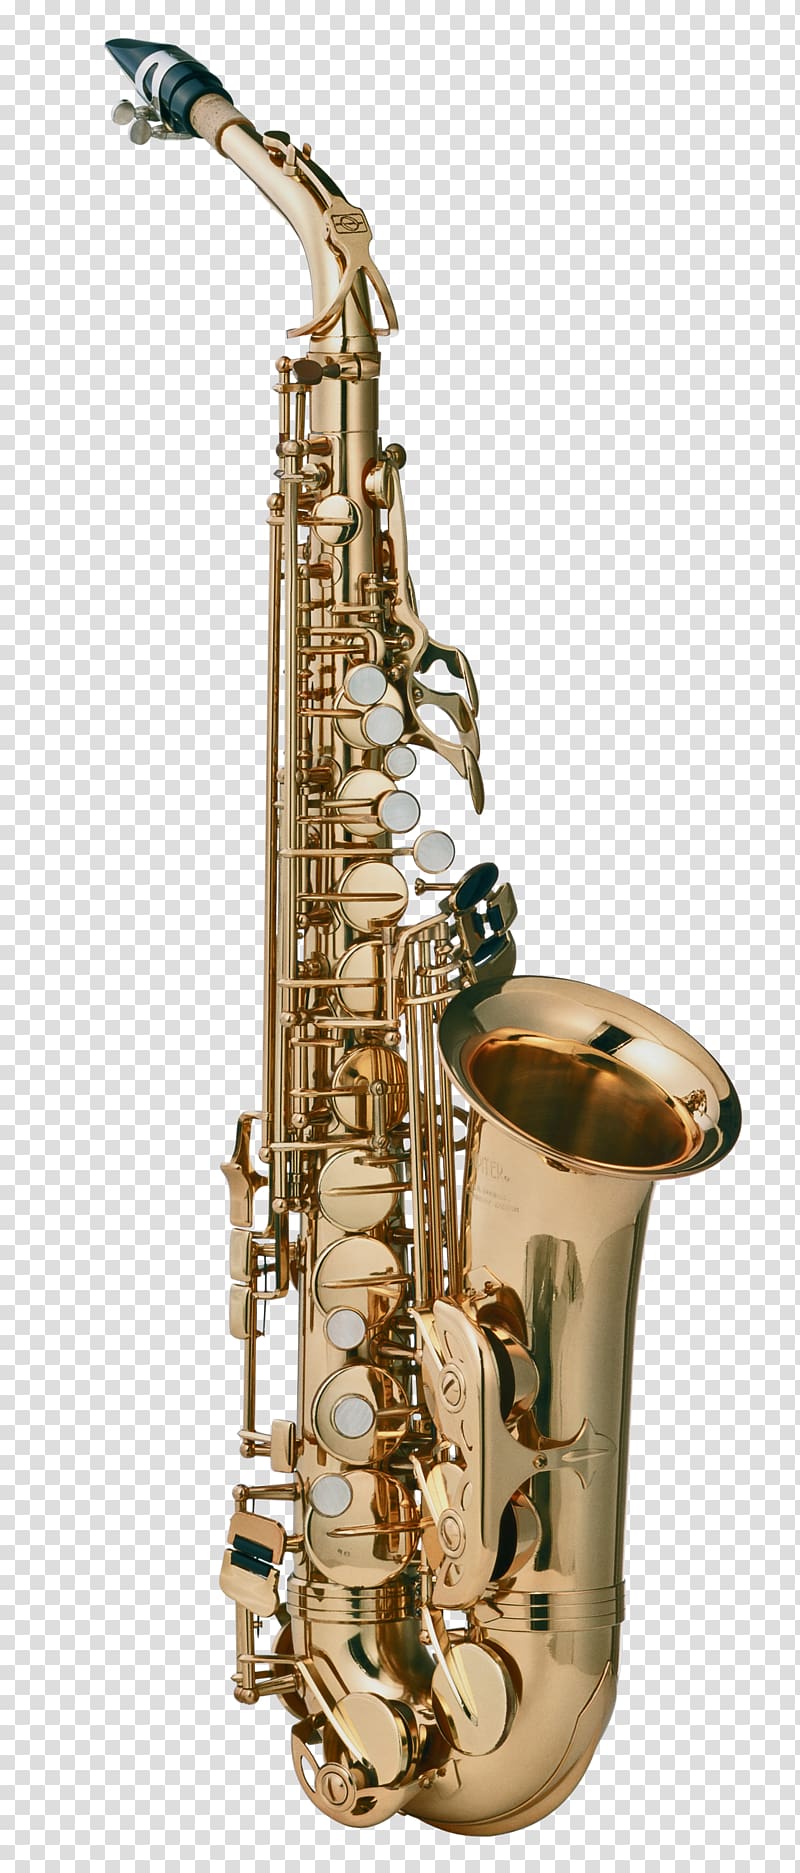 Soprano saxophone Musical Instruments Wind instrument, Music instruments transparent background PNG clipart